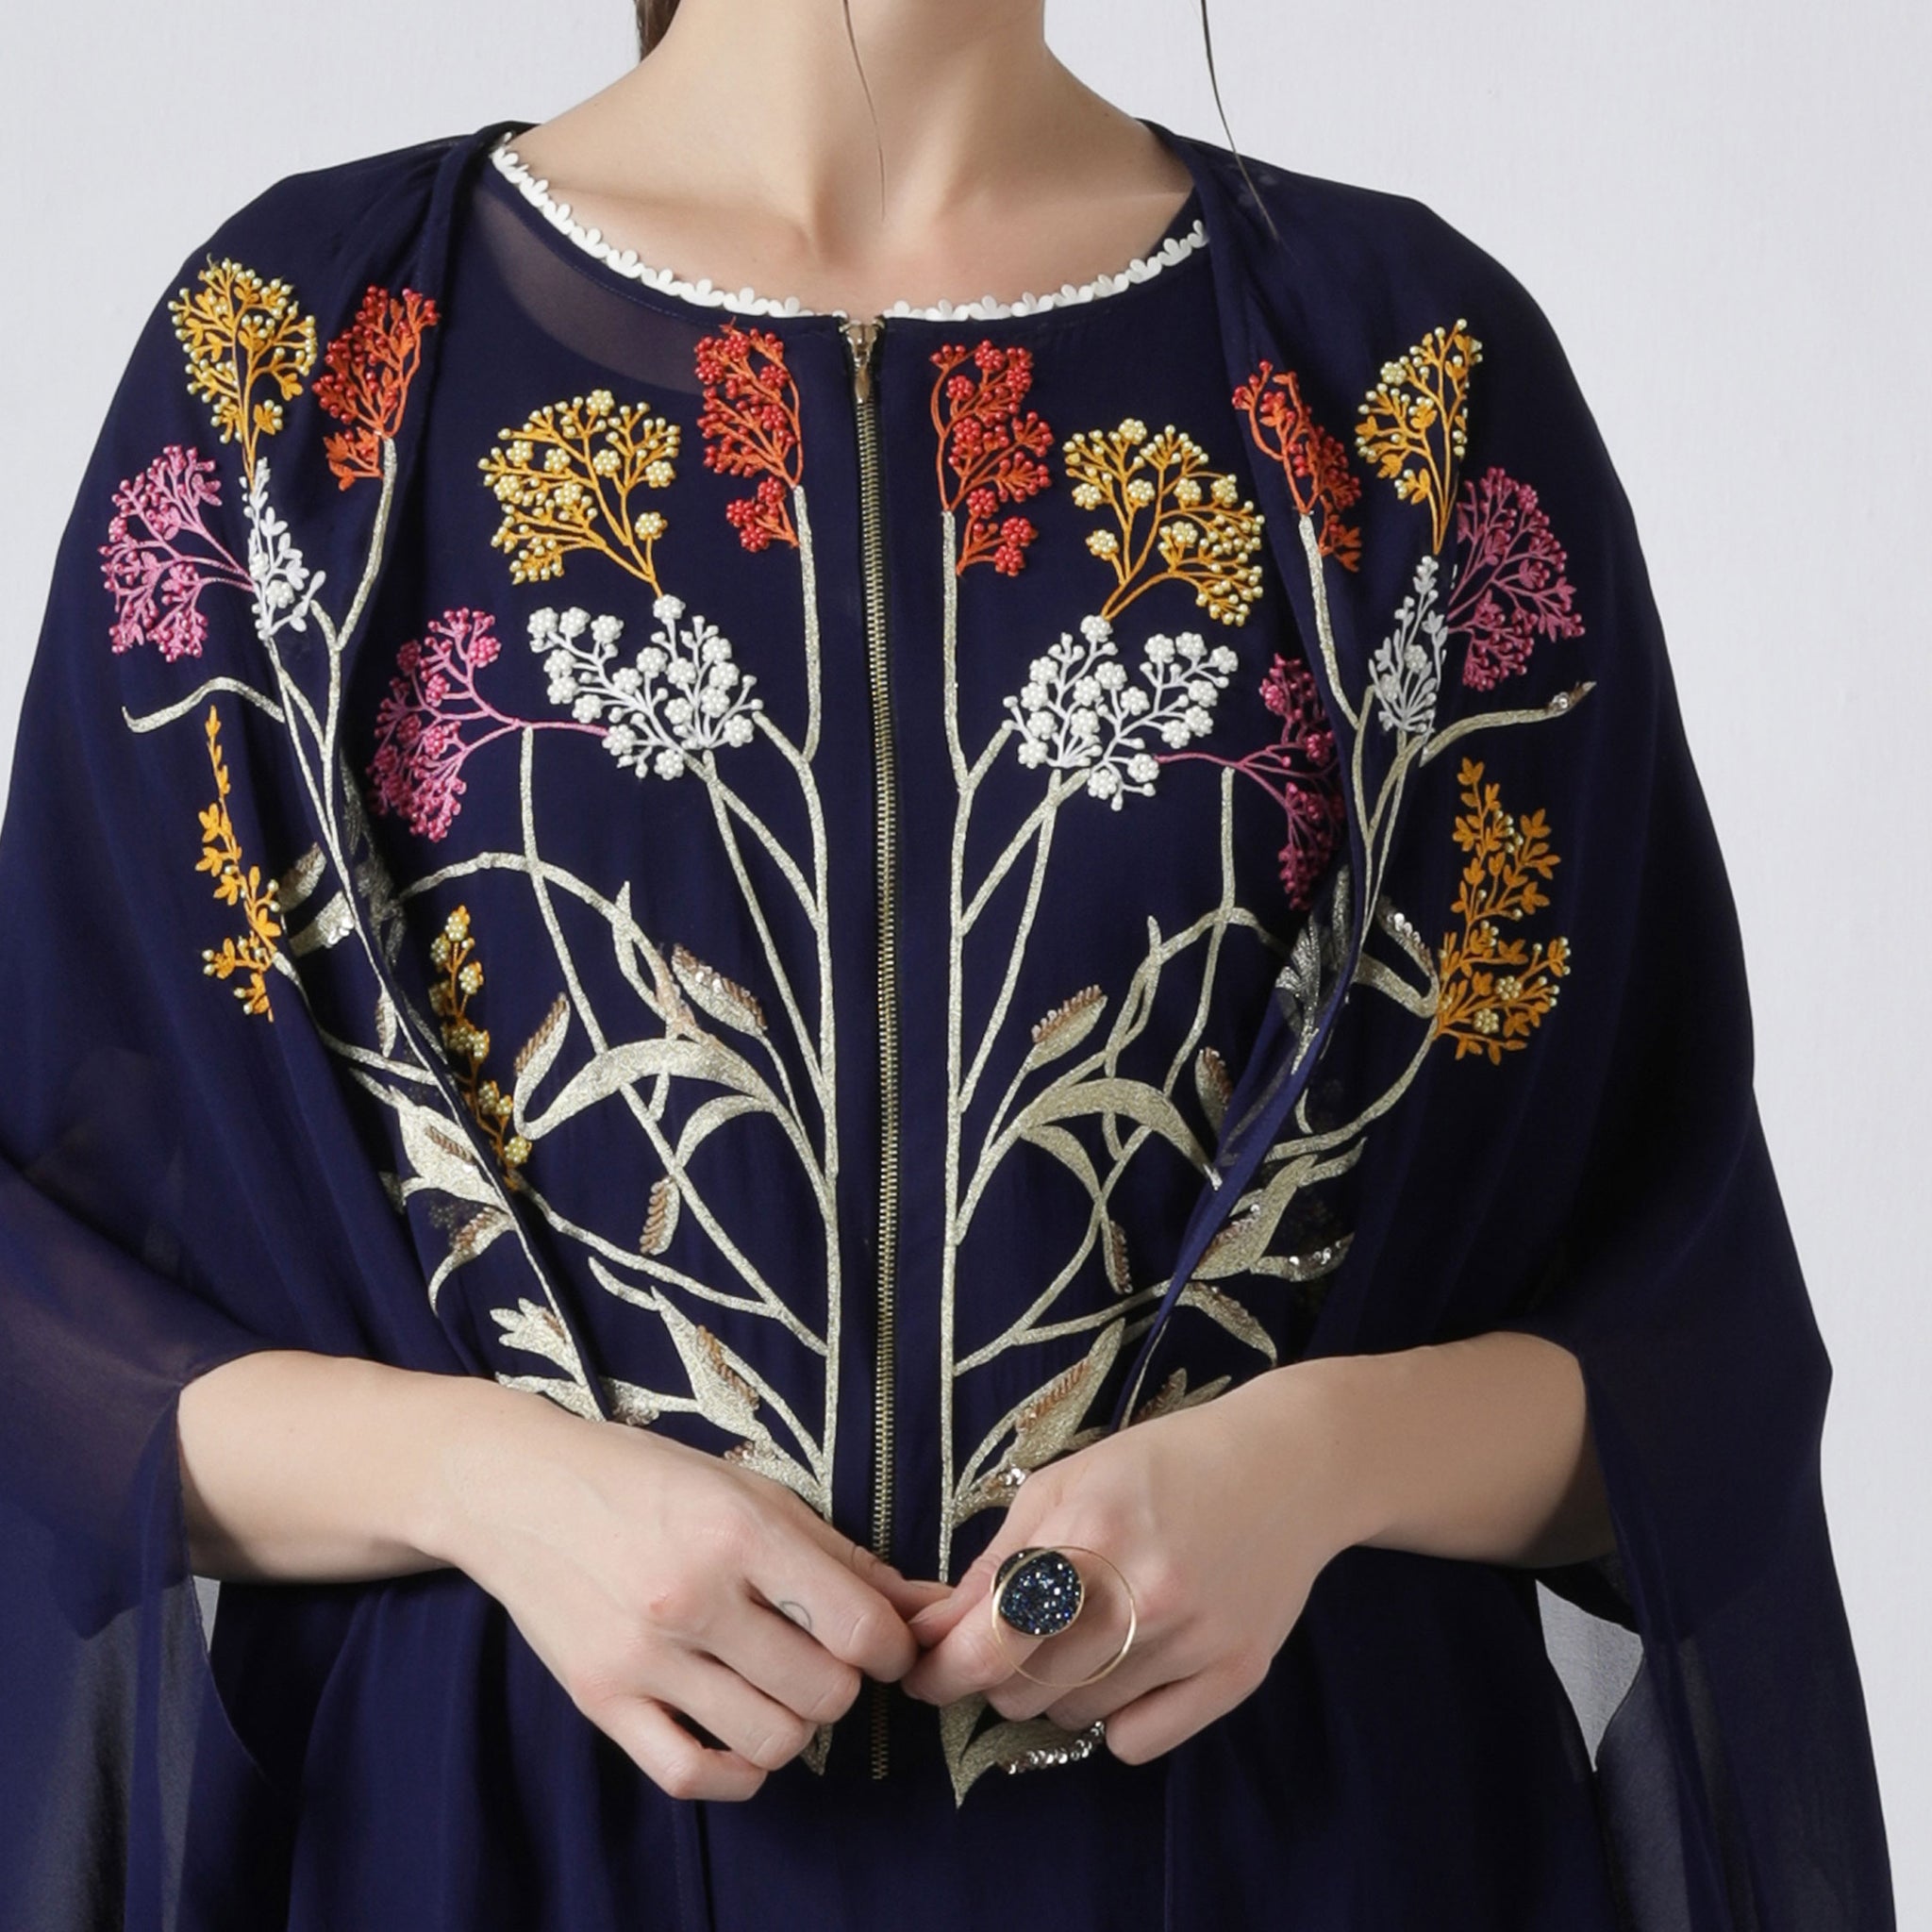 Embroidered Cape and Tunic with Dhoti Pants